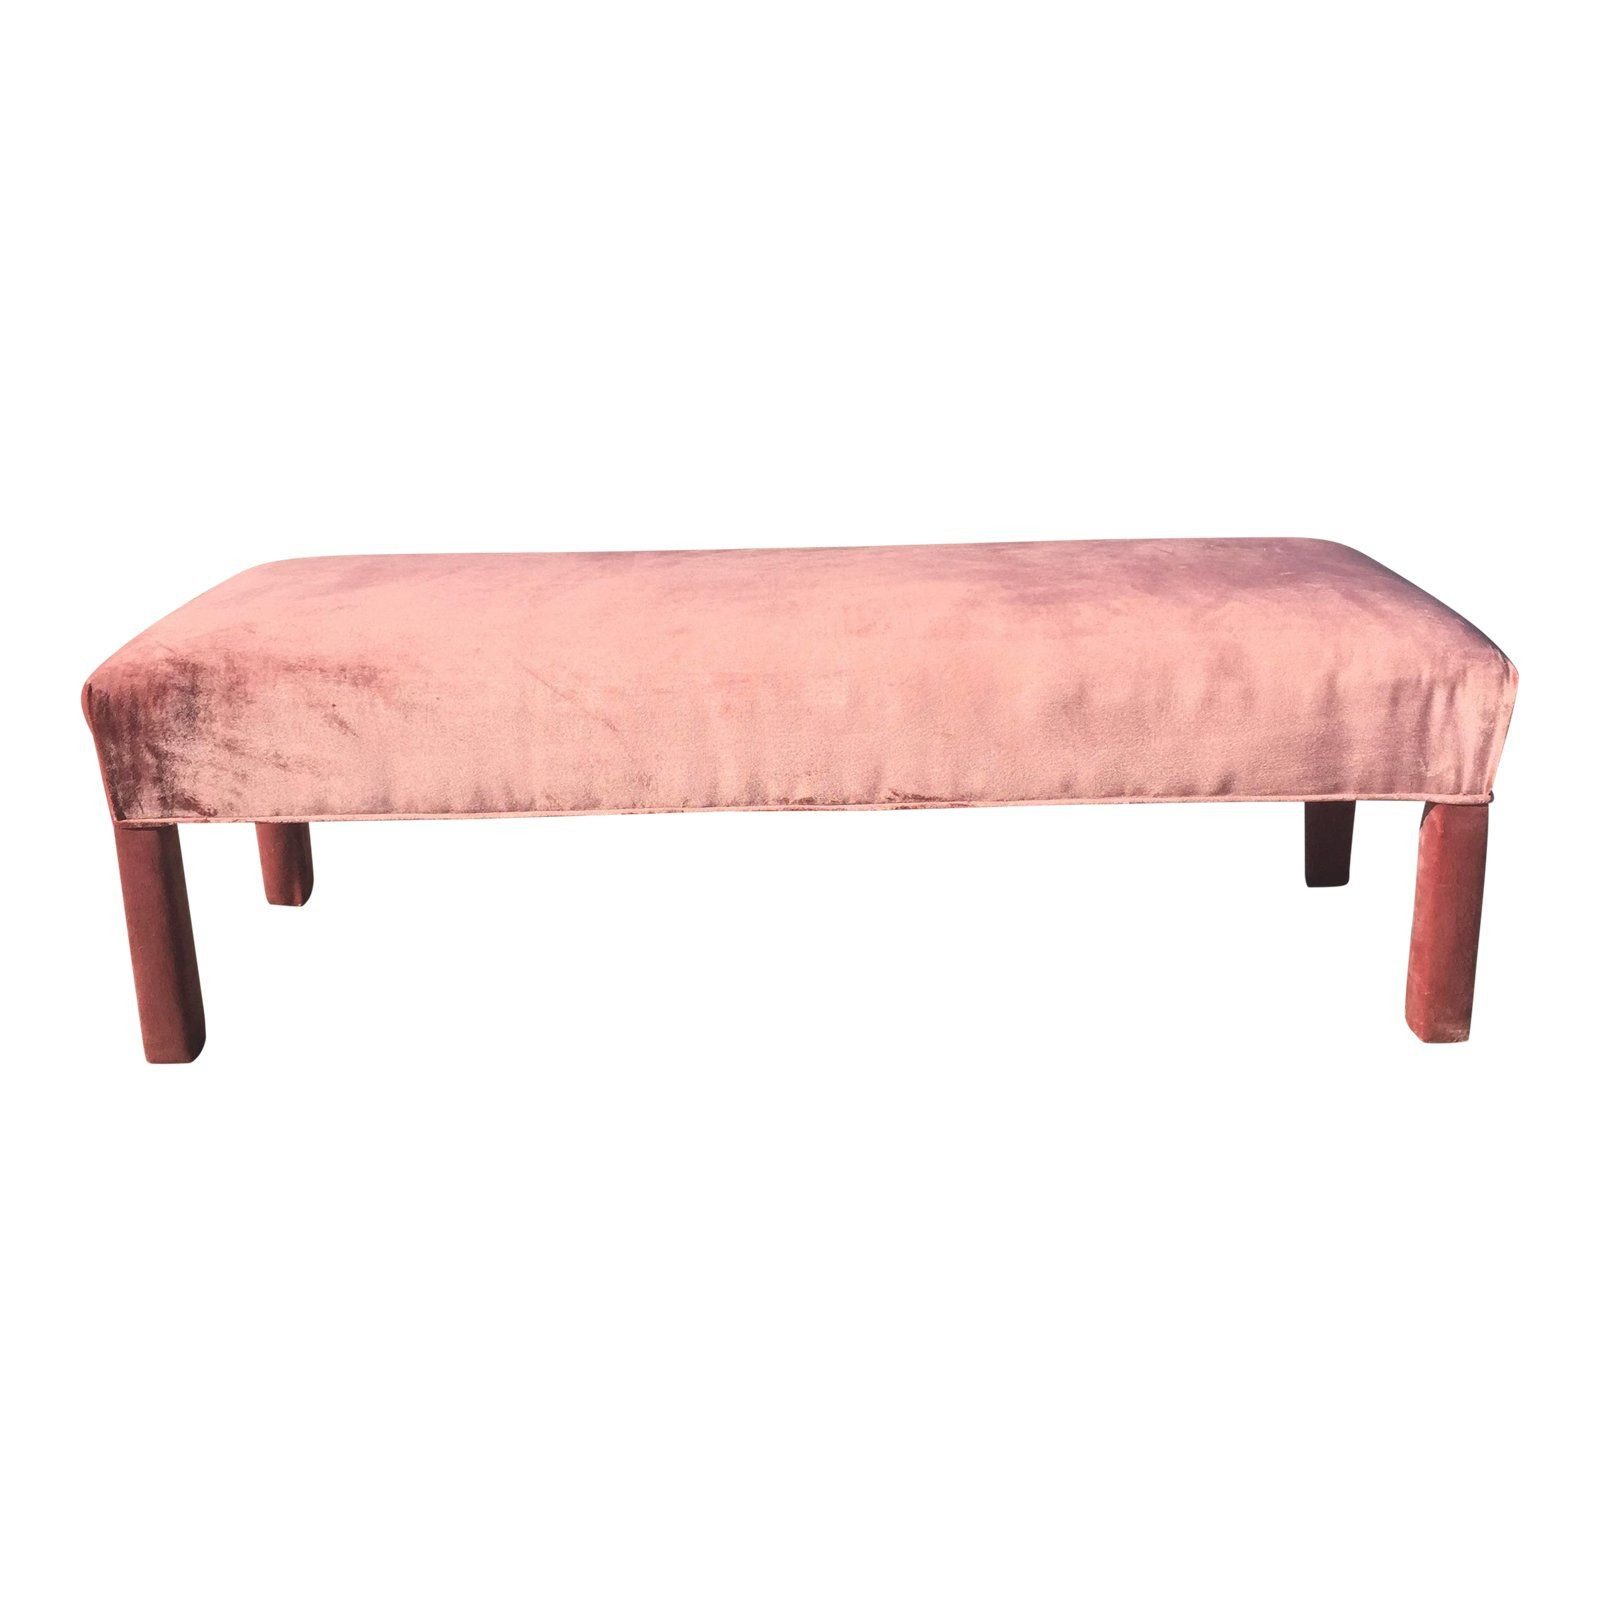 Bedroom Bench with Back Unique Dusty Rose Pink Velvet Upholstered Parsons Bench In 2019